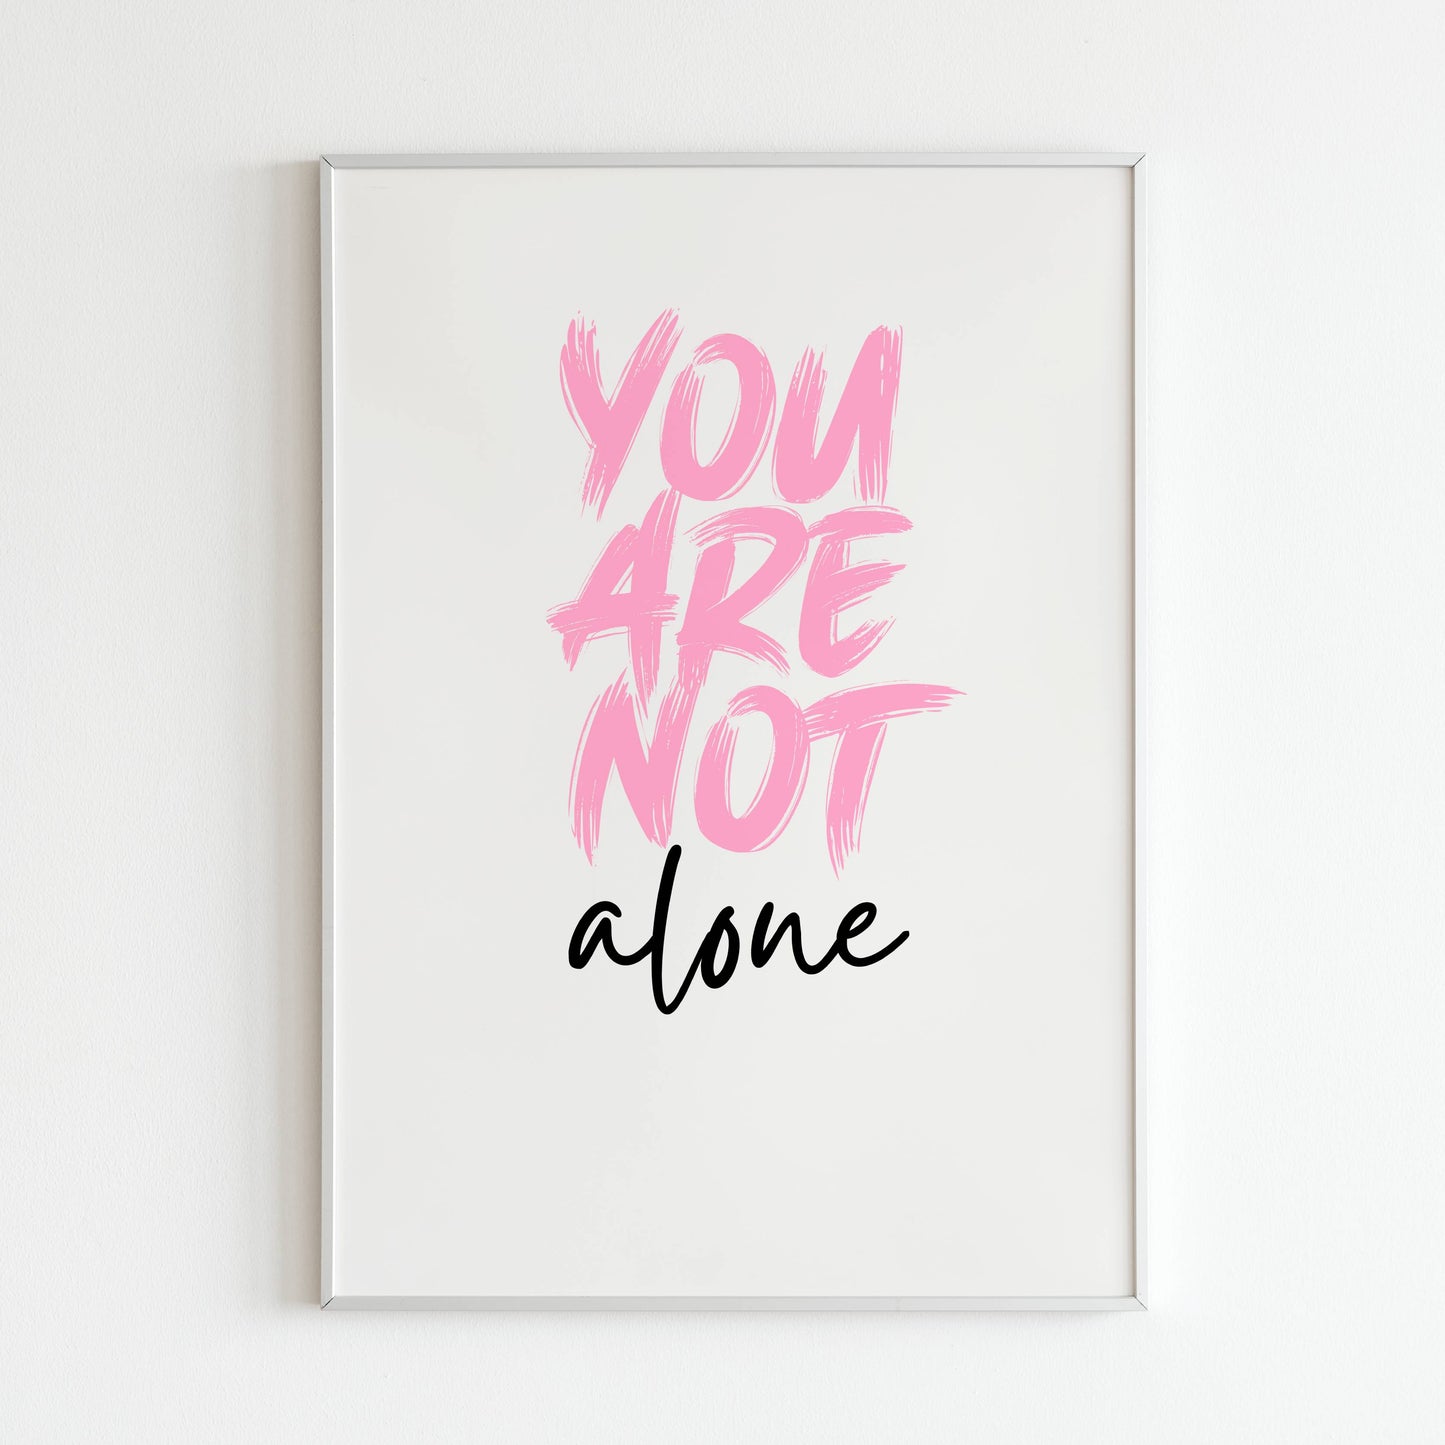 Downloadable "You are not alone" wall art for a message of hope